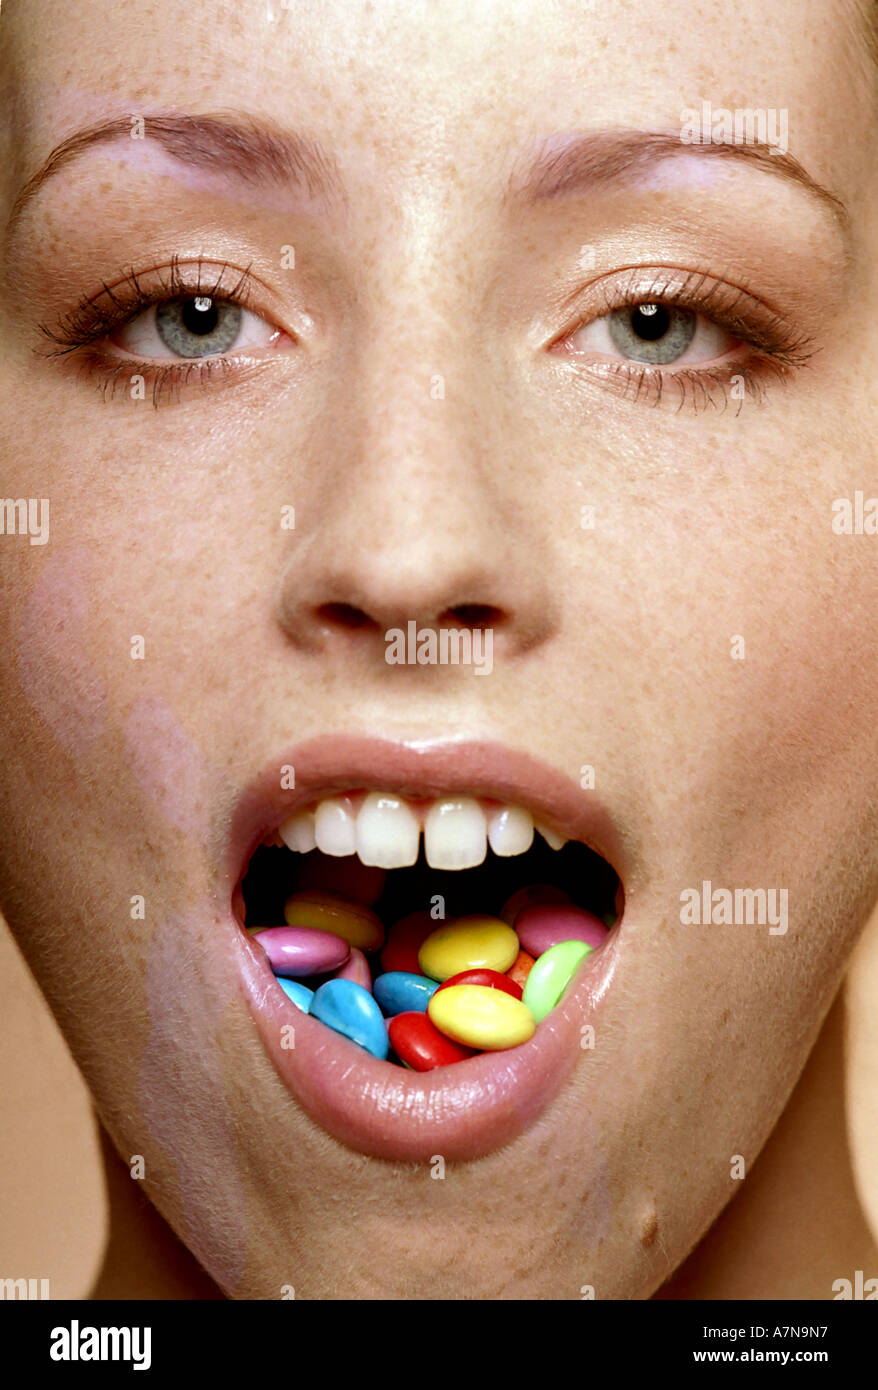 indoor studio woman young girl 20 25 freckle freckles hold mouth pill pills tab tabs tablette teblettes medicine medicines re Stock Photo